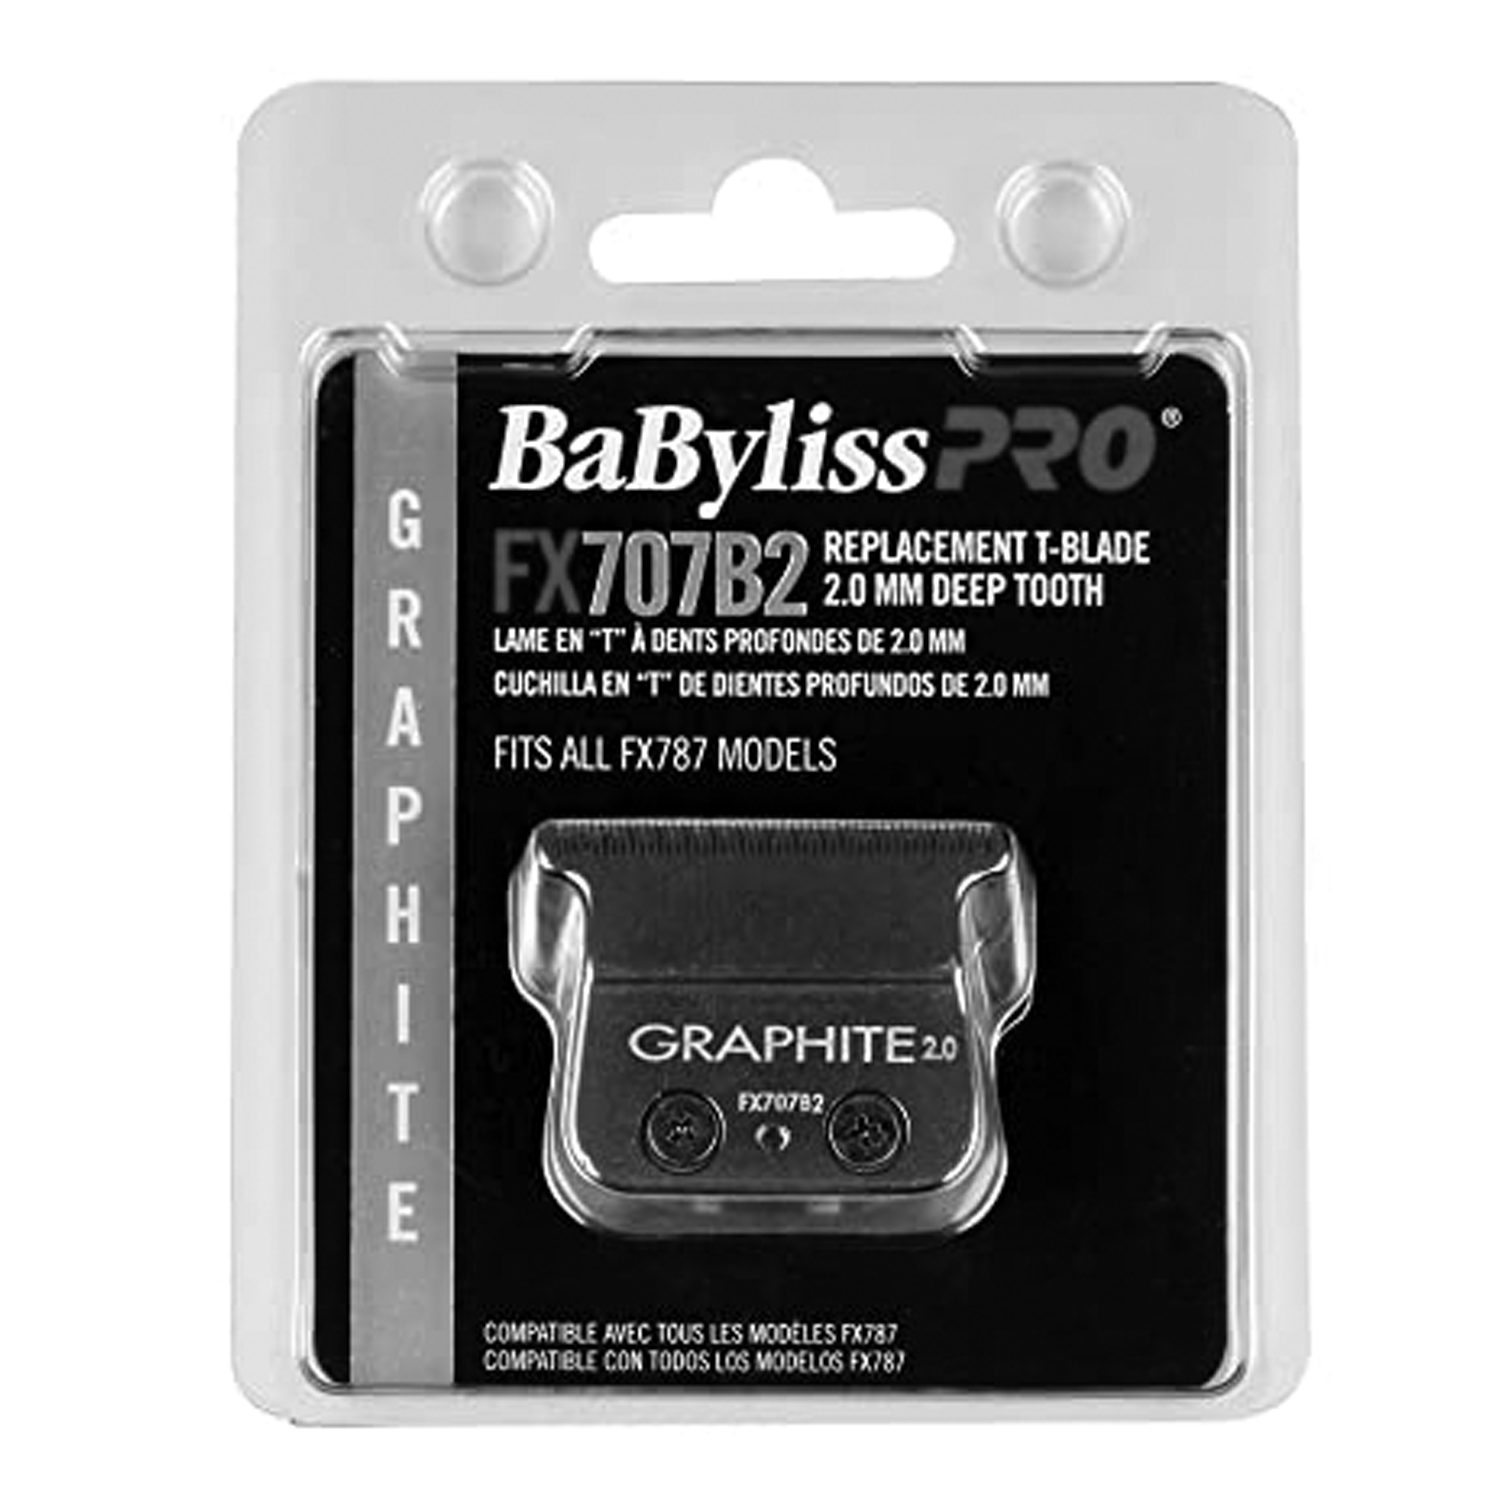 BaBylissPRO FX707B2 Barberology Replacement Blades for Outlining Hair Trimmers (FX787)